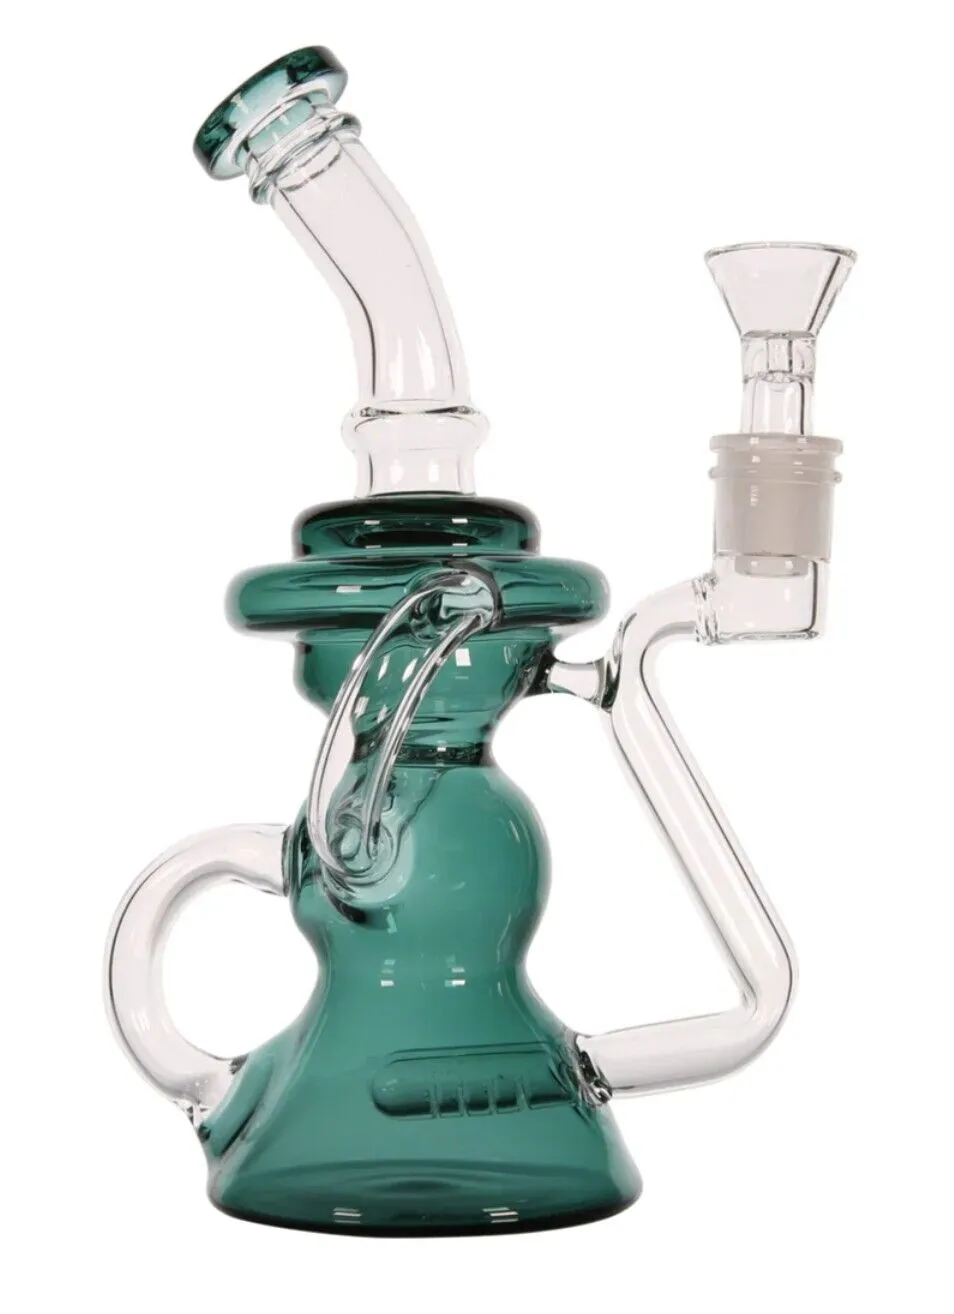 Pineapple Glass Bong Water Pipes Hookahs Smoking Glass Pipe beaker Water Bongs Dab Rigs With 14mm Bowl 20cm tall